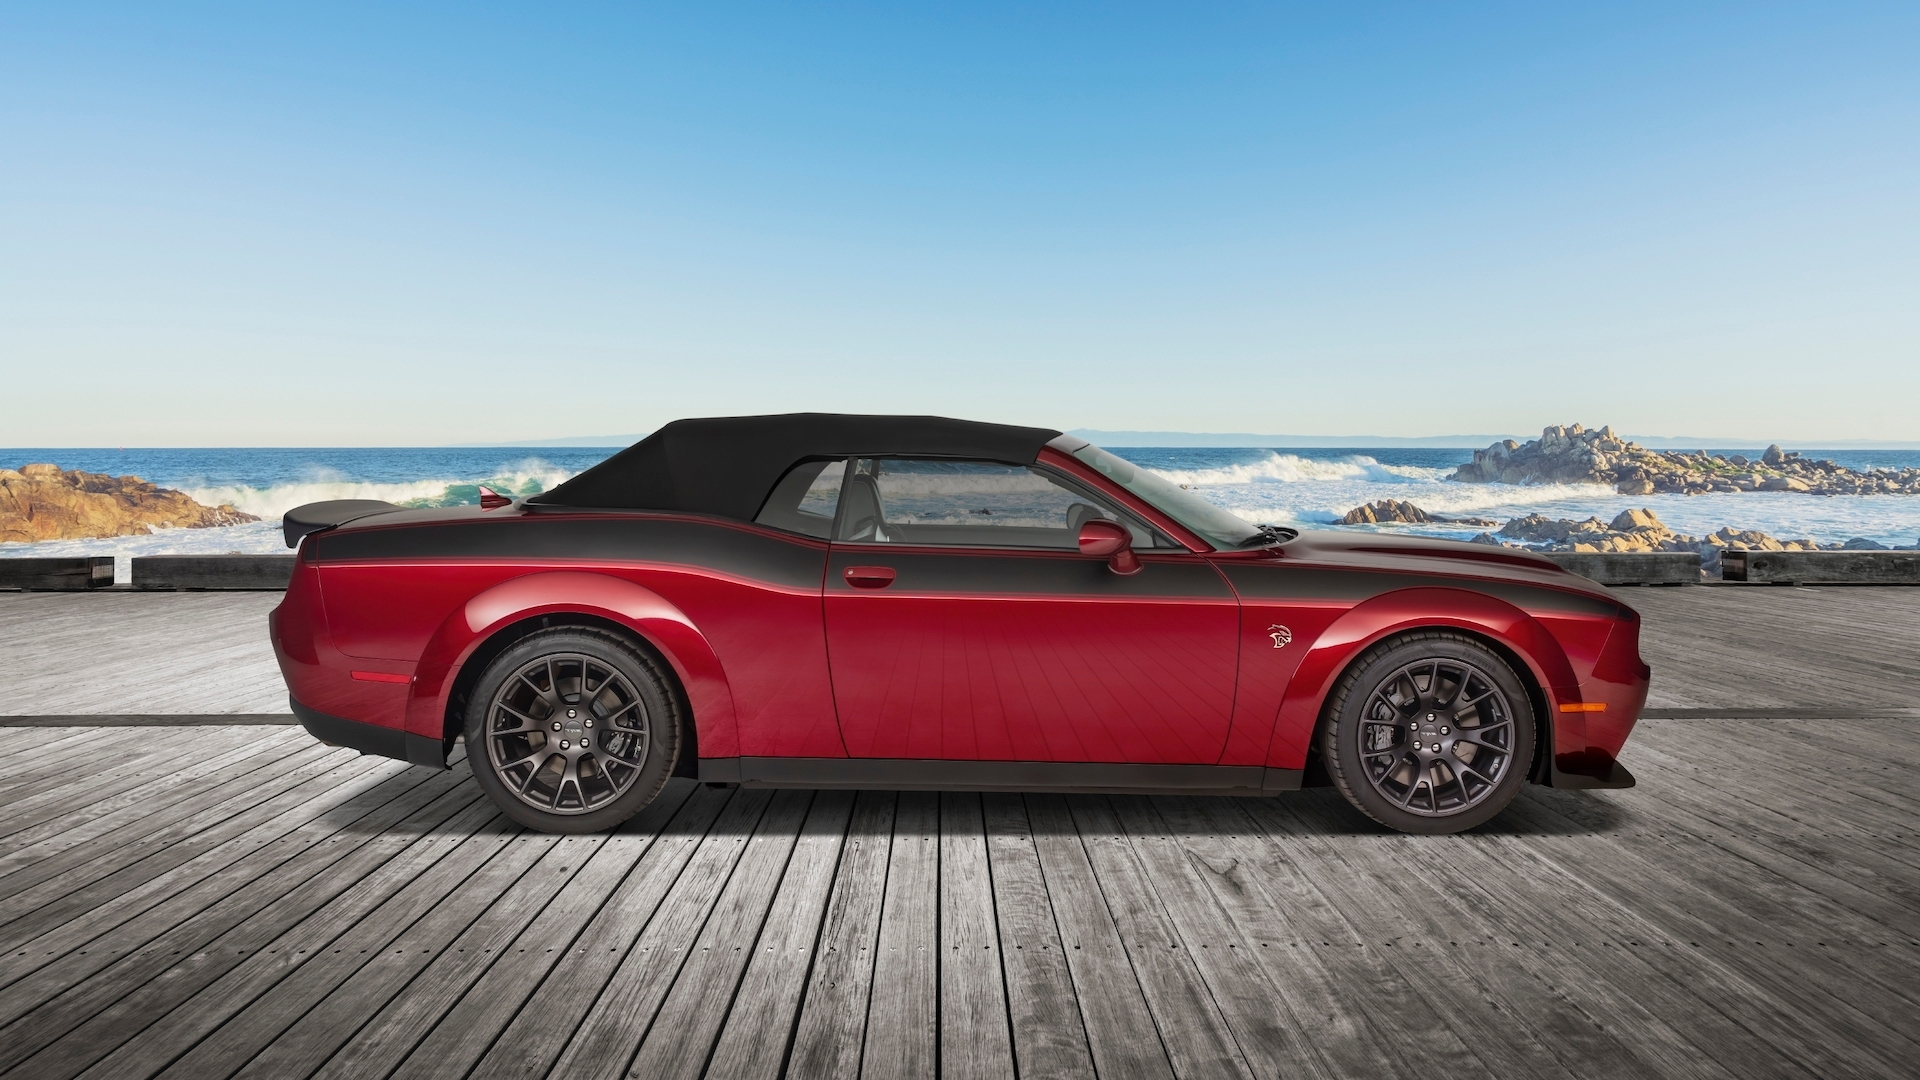 2022 Dodge Challenger convertible conversion by Drop Top Customs